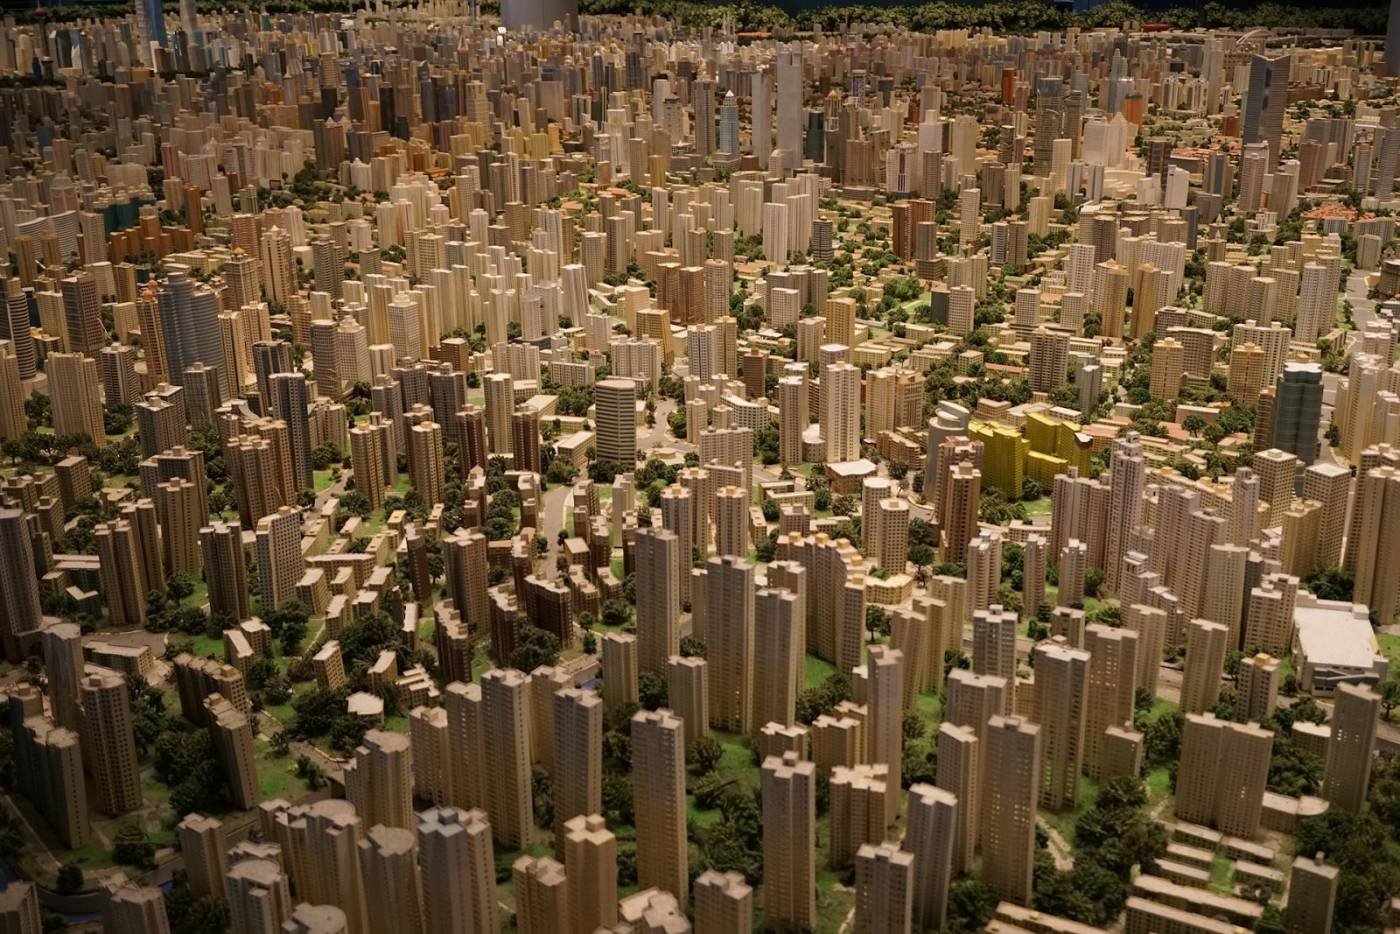 Image of a physical model city